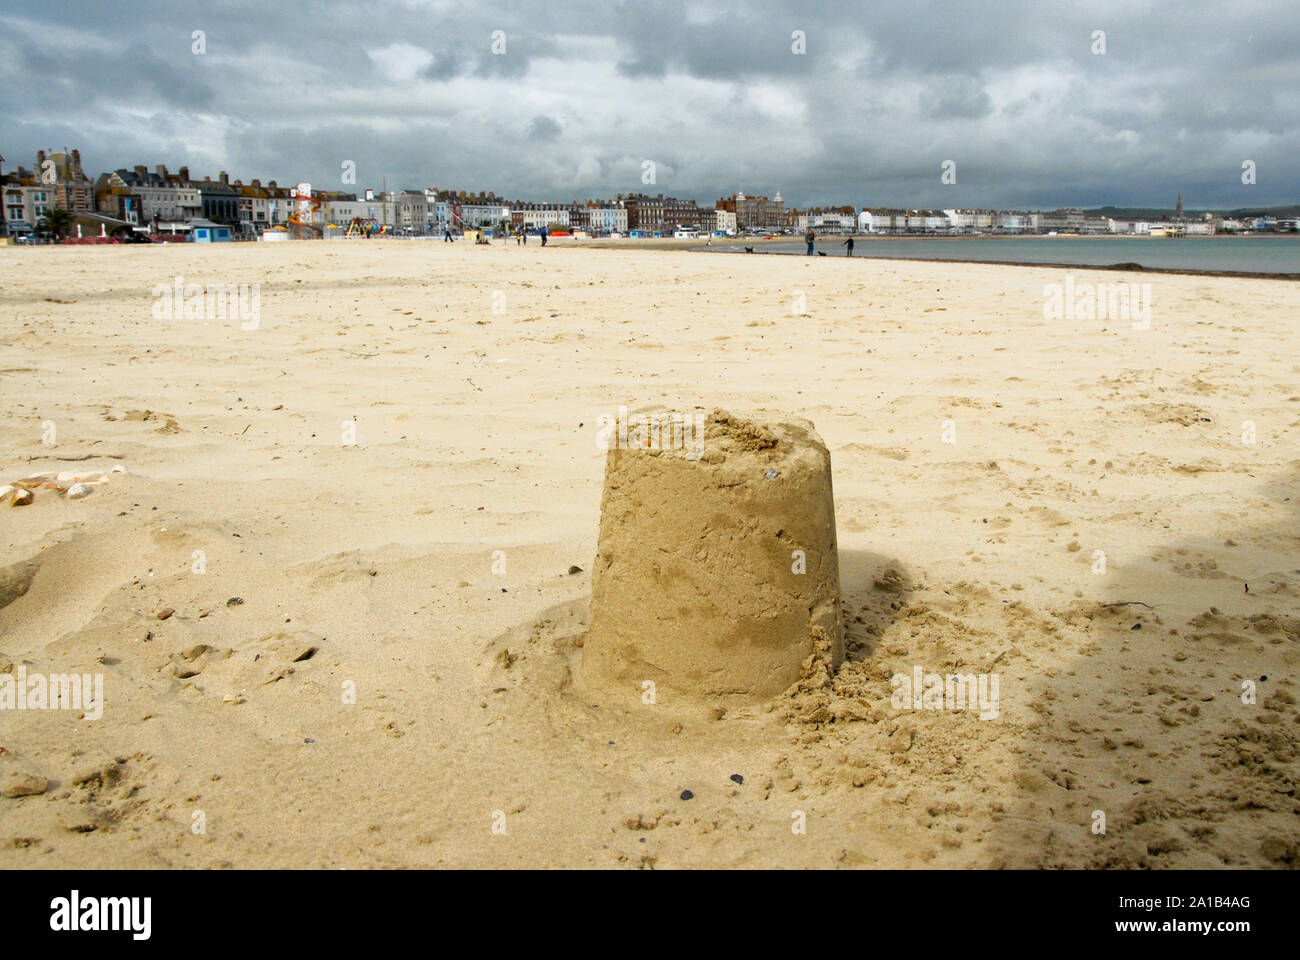 Weymouth. 25th September 2019. UK Weather. A solitary sandcastle sits on Weymouth sands, under threatening storm clouds. credit: stuart fretwell/Alamy Live News Stock Photo